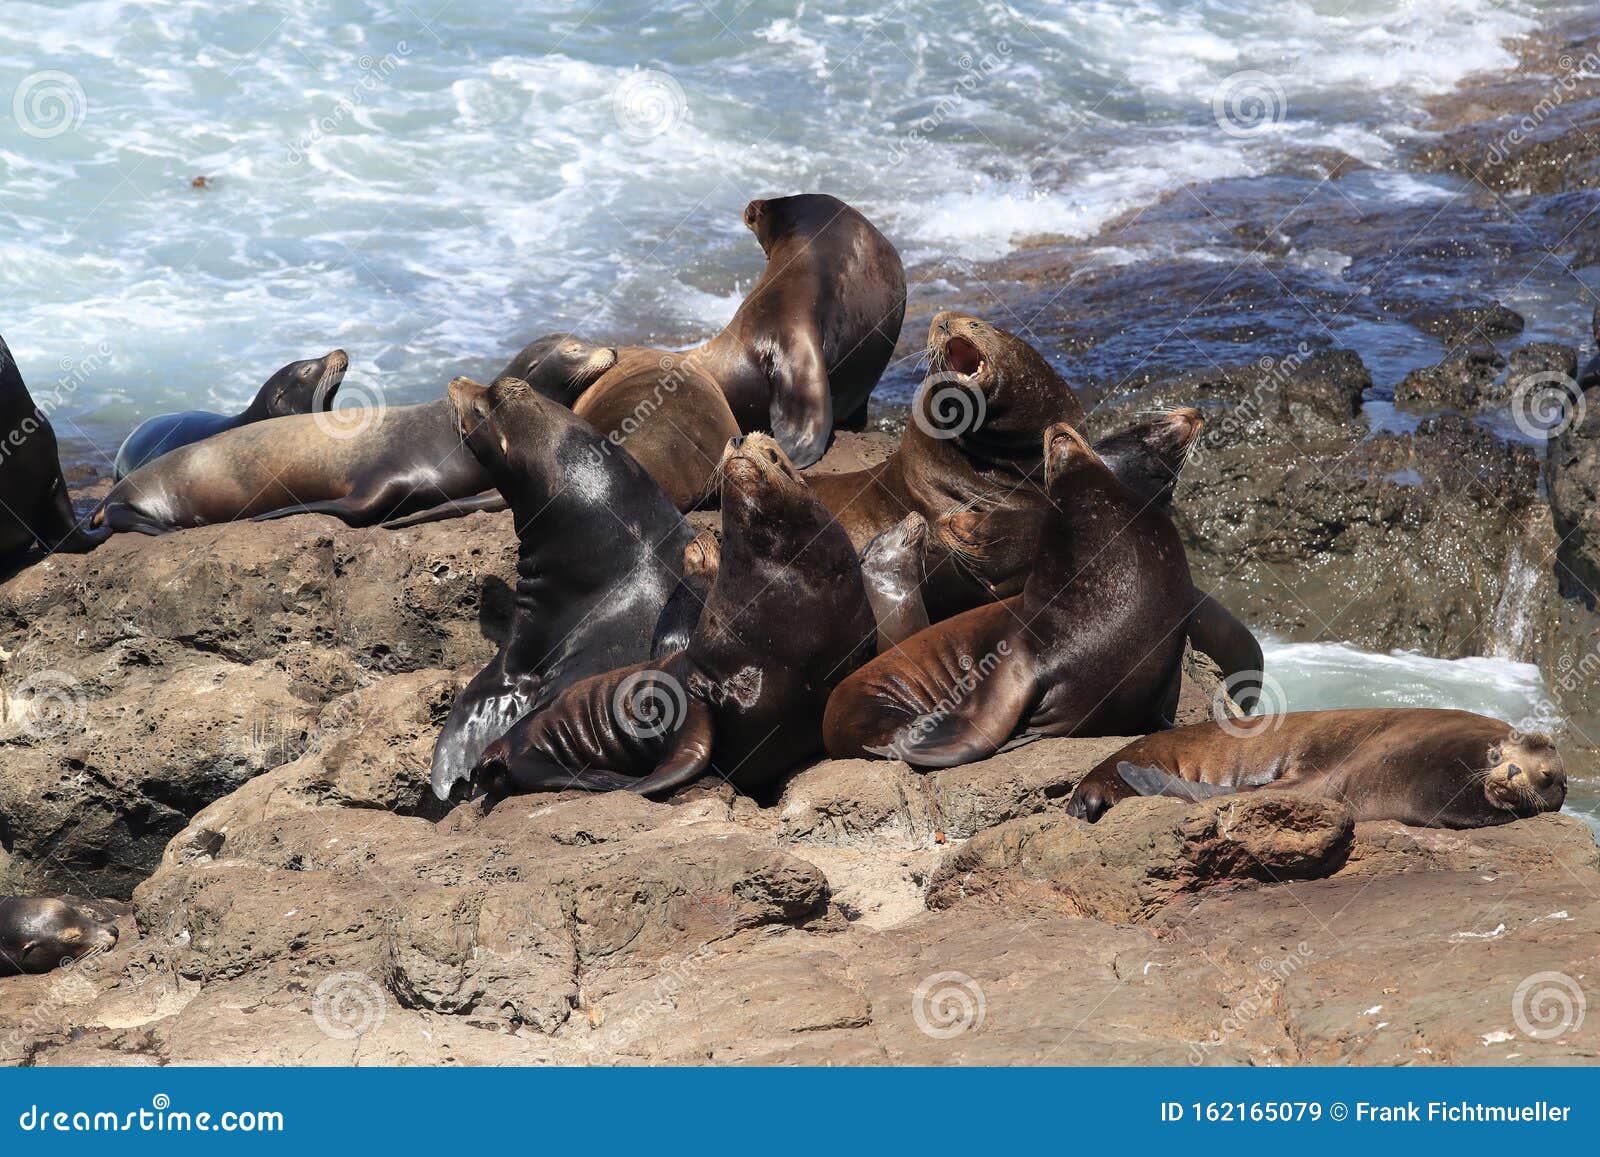 Sea Lions at Cape Arago Cliffs State Park, Coos Bay, Oregon,USA Stock